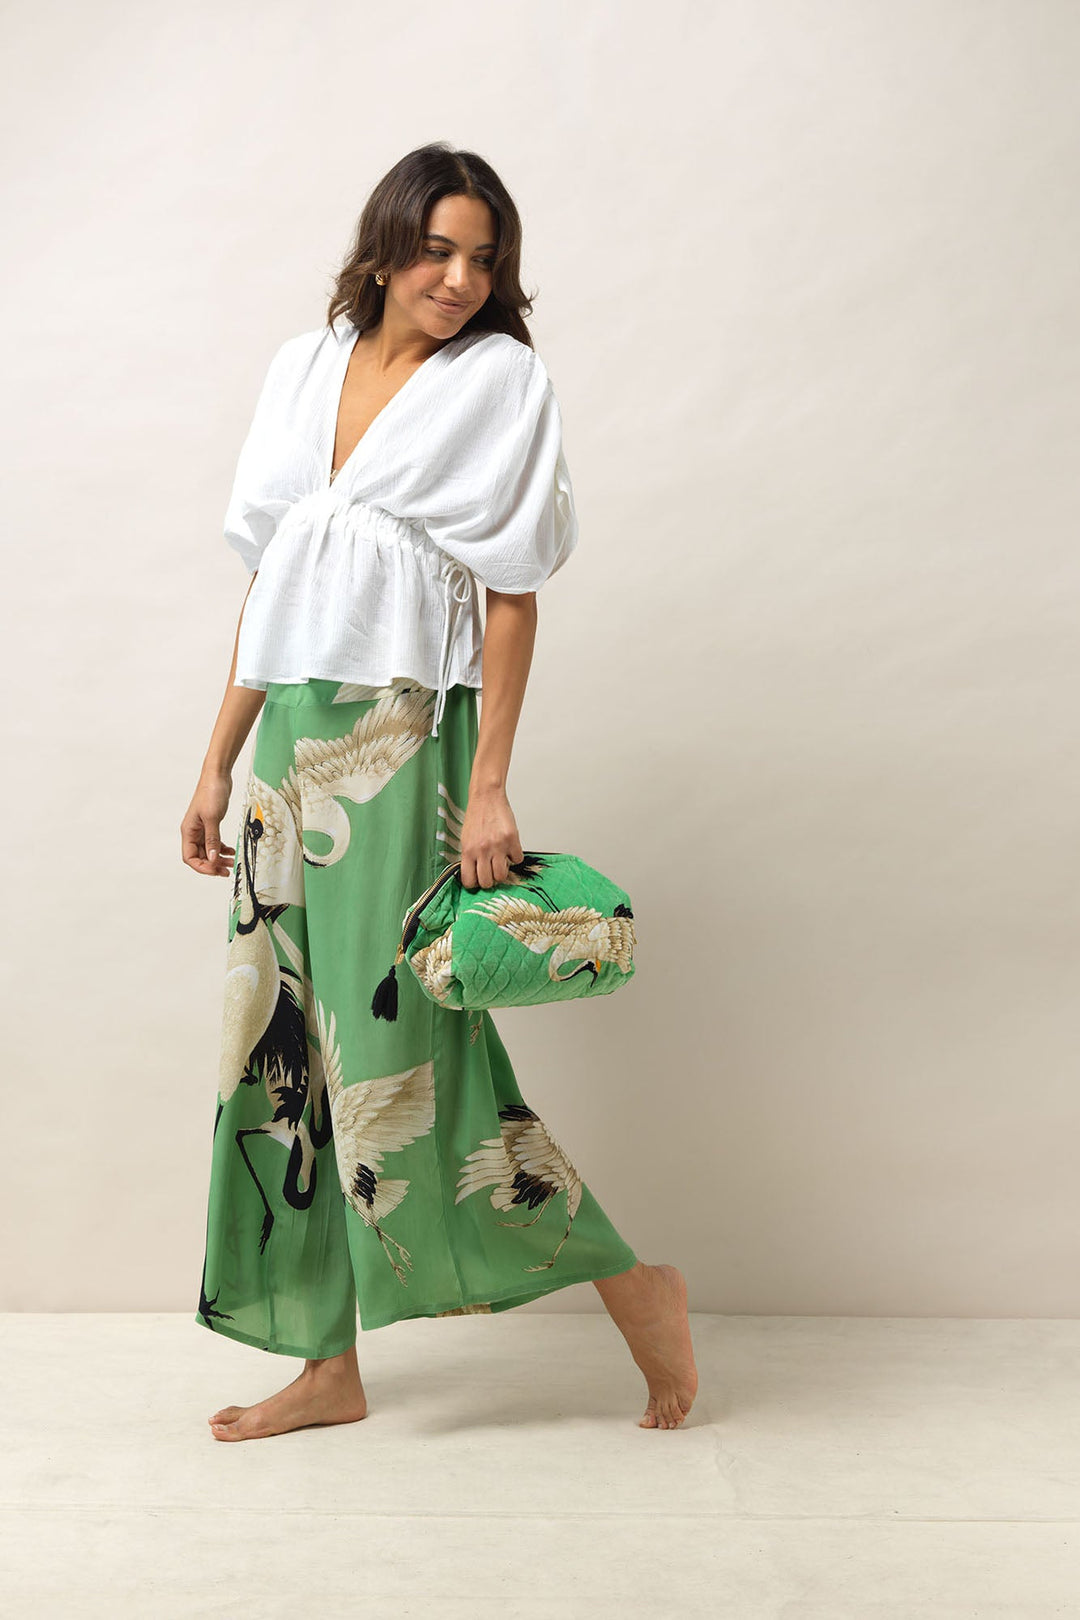 Women's palazzo pants trousers crepe in in pea green and white stork print by One Hundred Stars